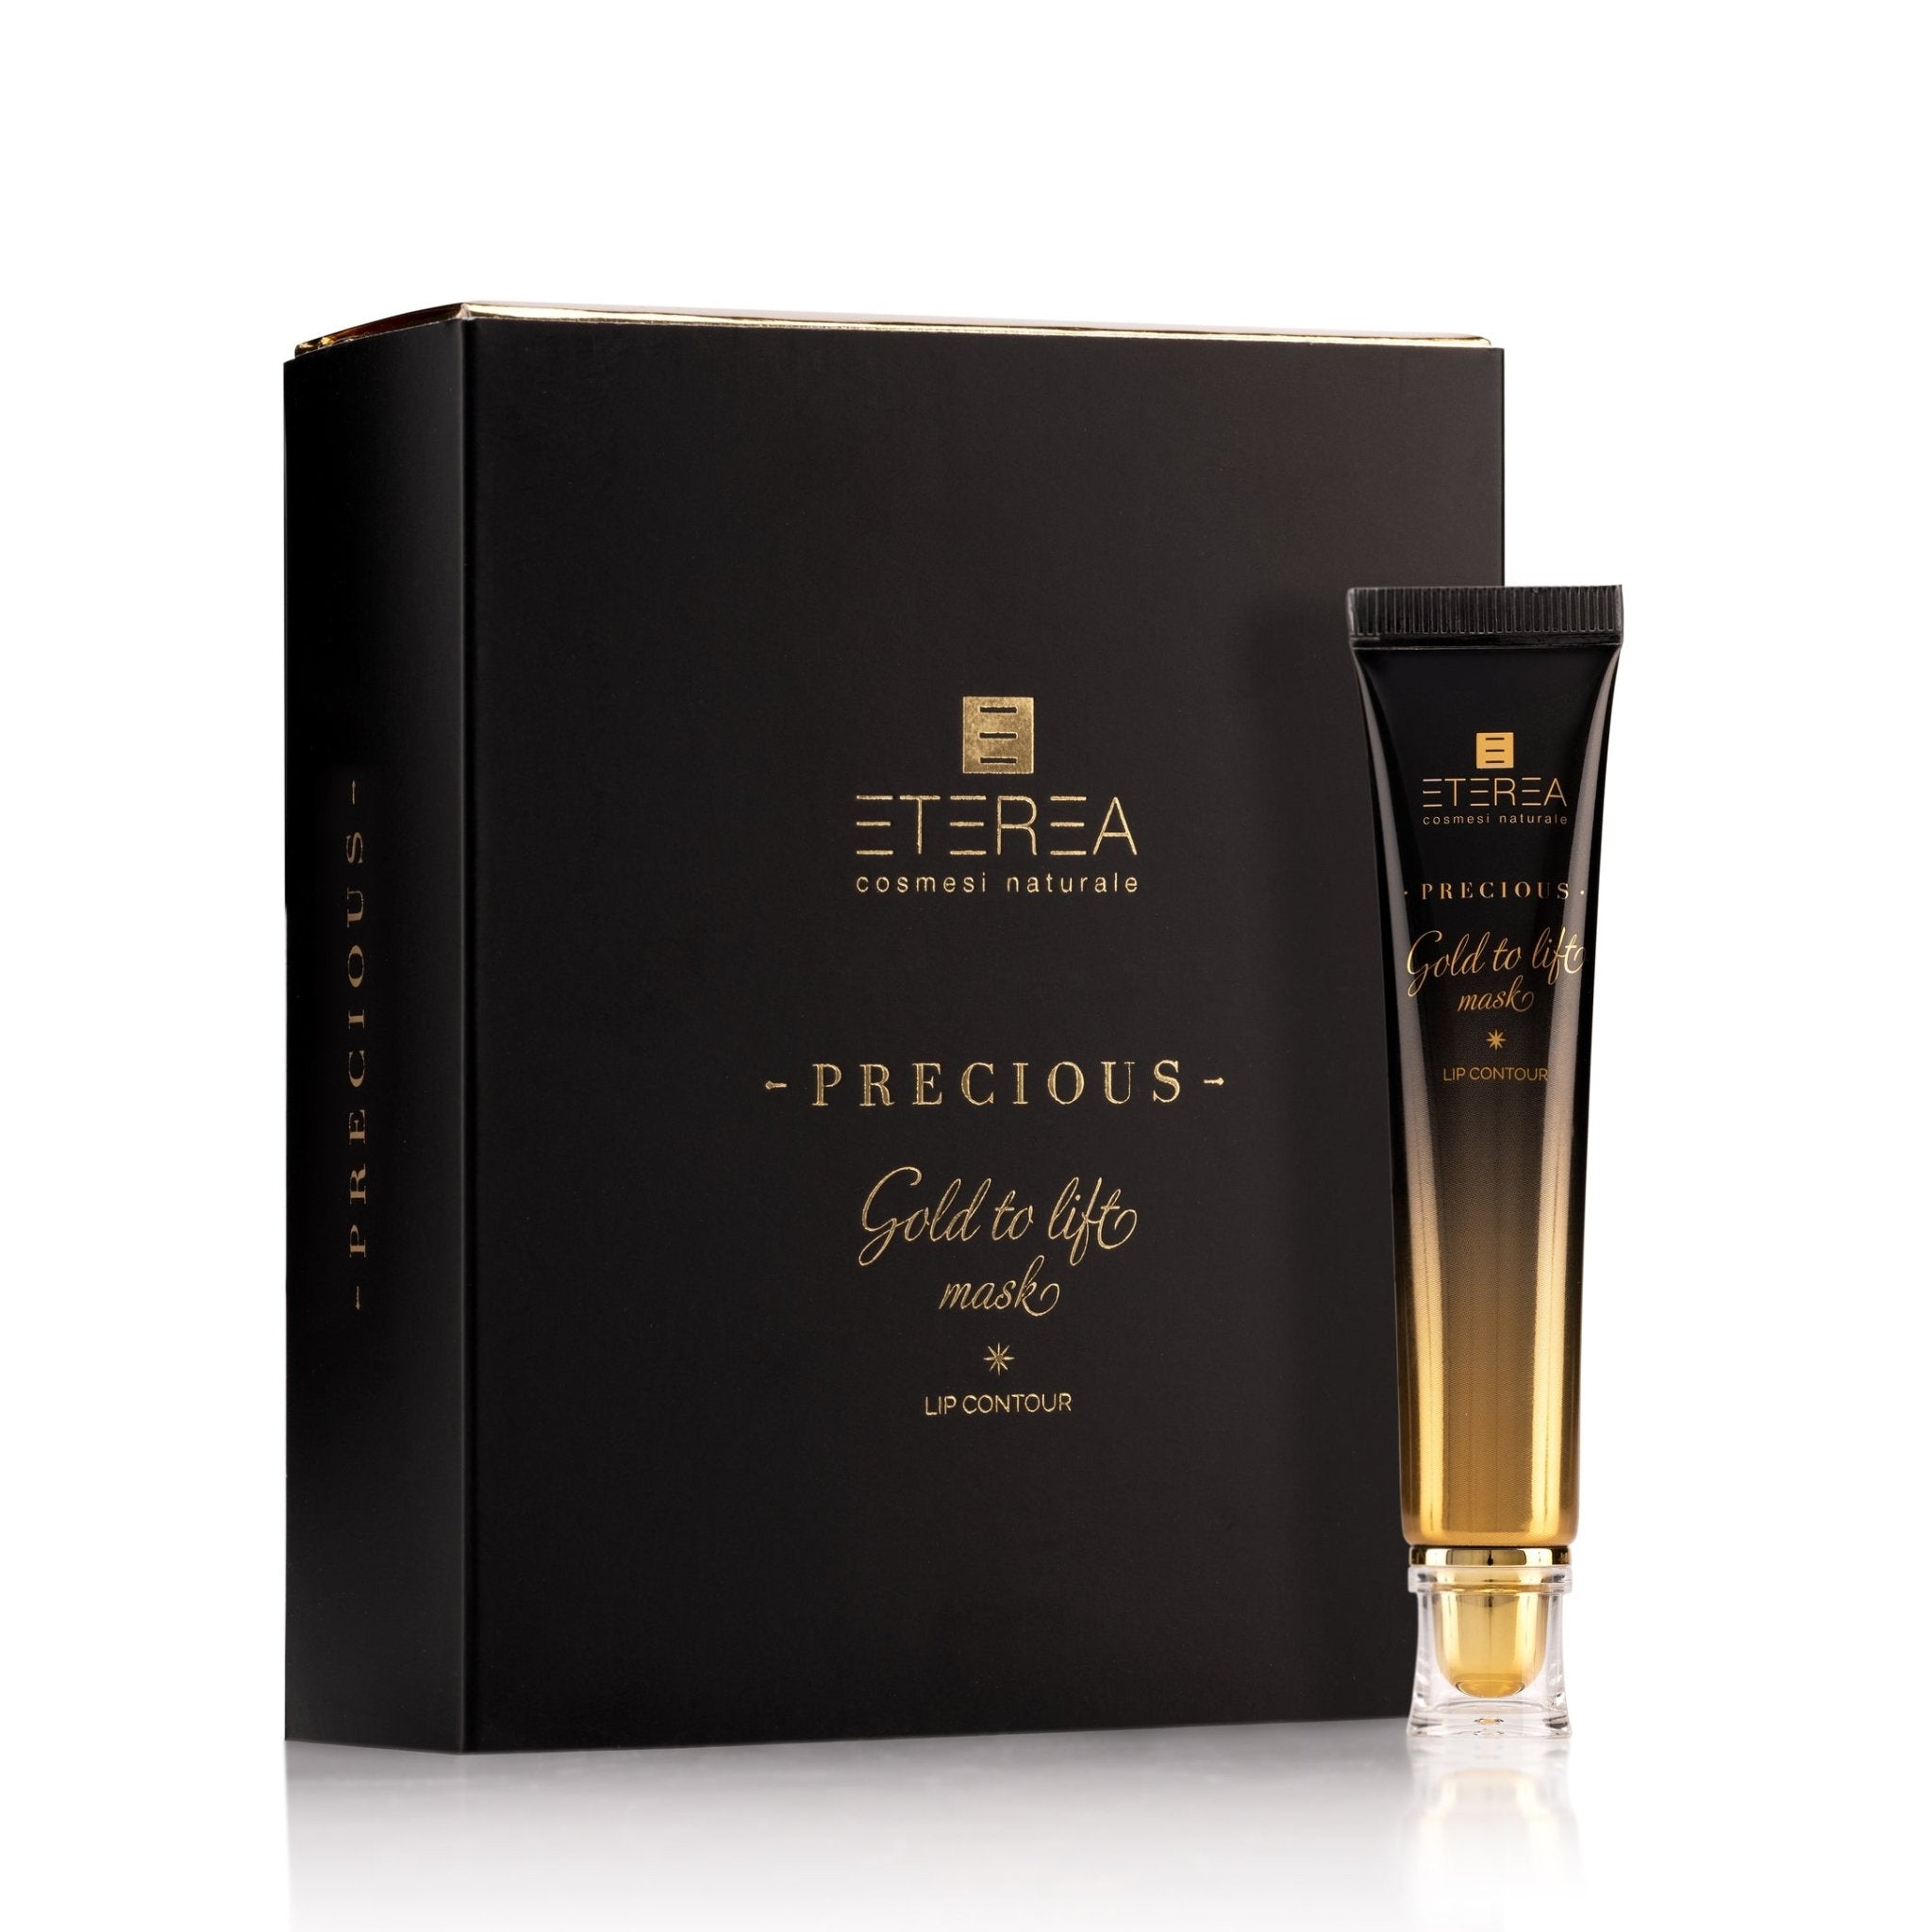 GOLD TO LIFT MASK - Eterea Cosmesi Naturale